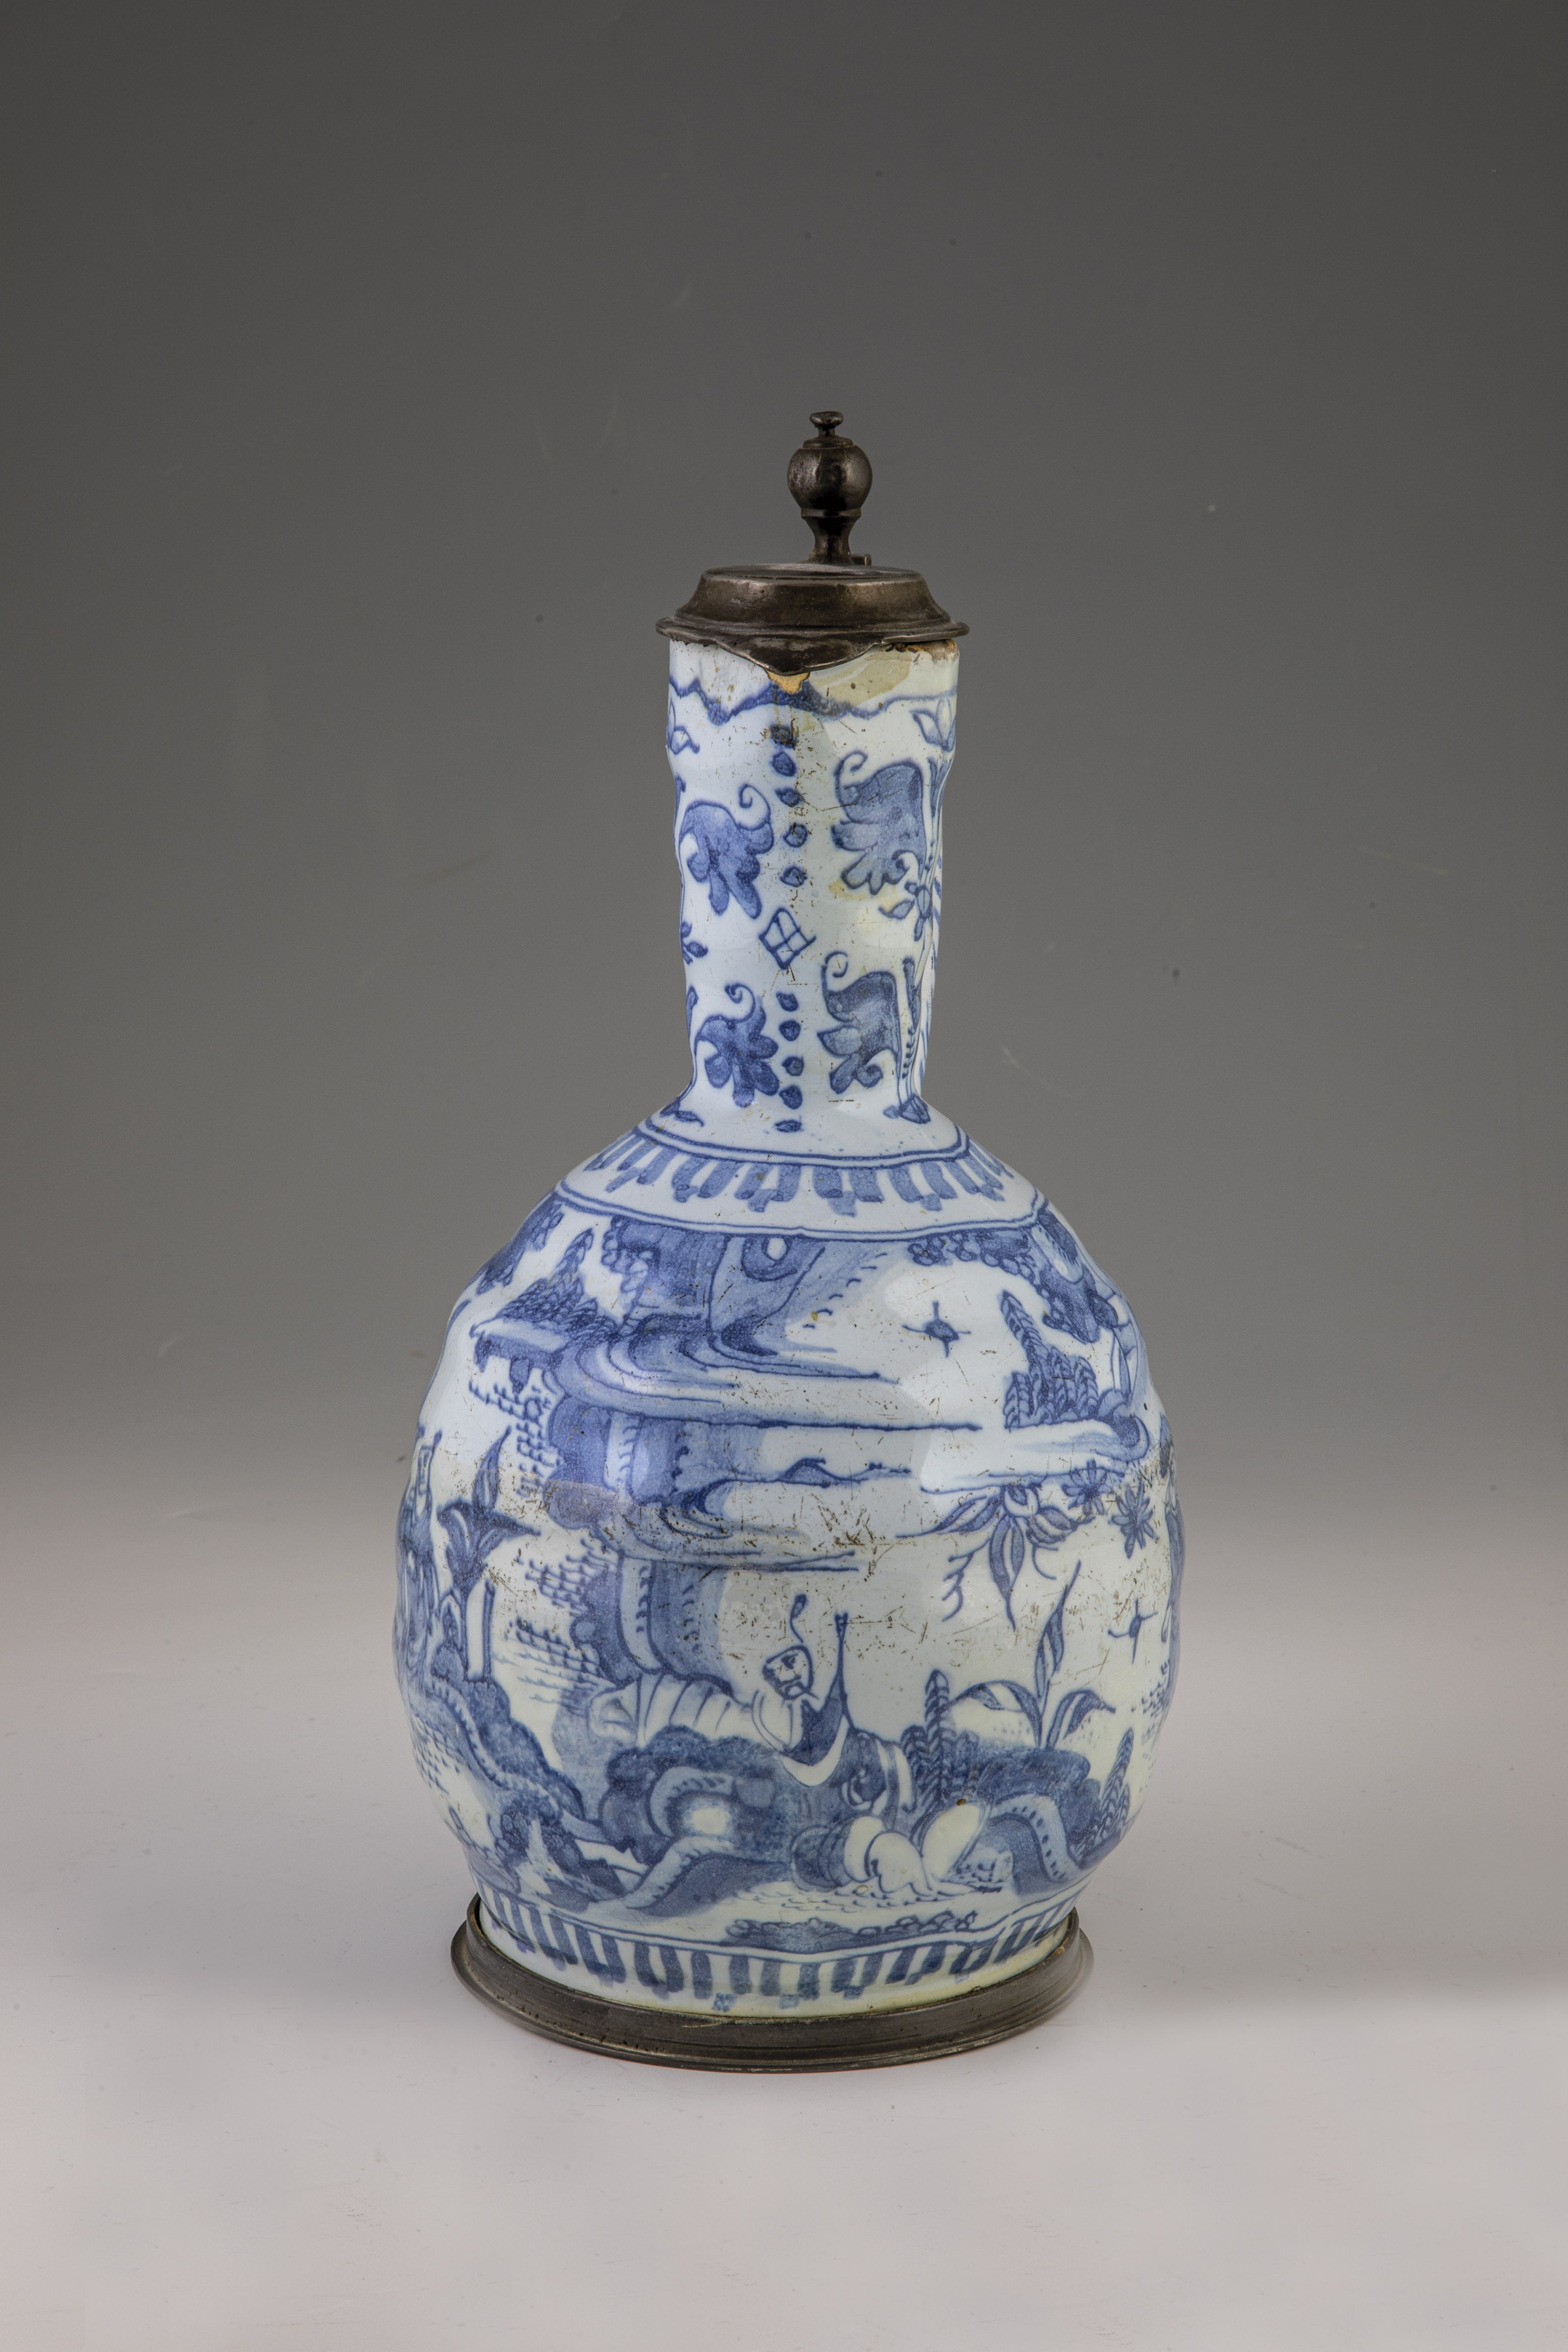 Narrow neck jug with chinoiserie - Image 2 of 3